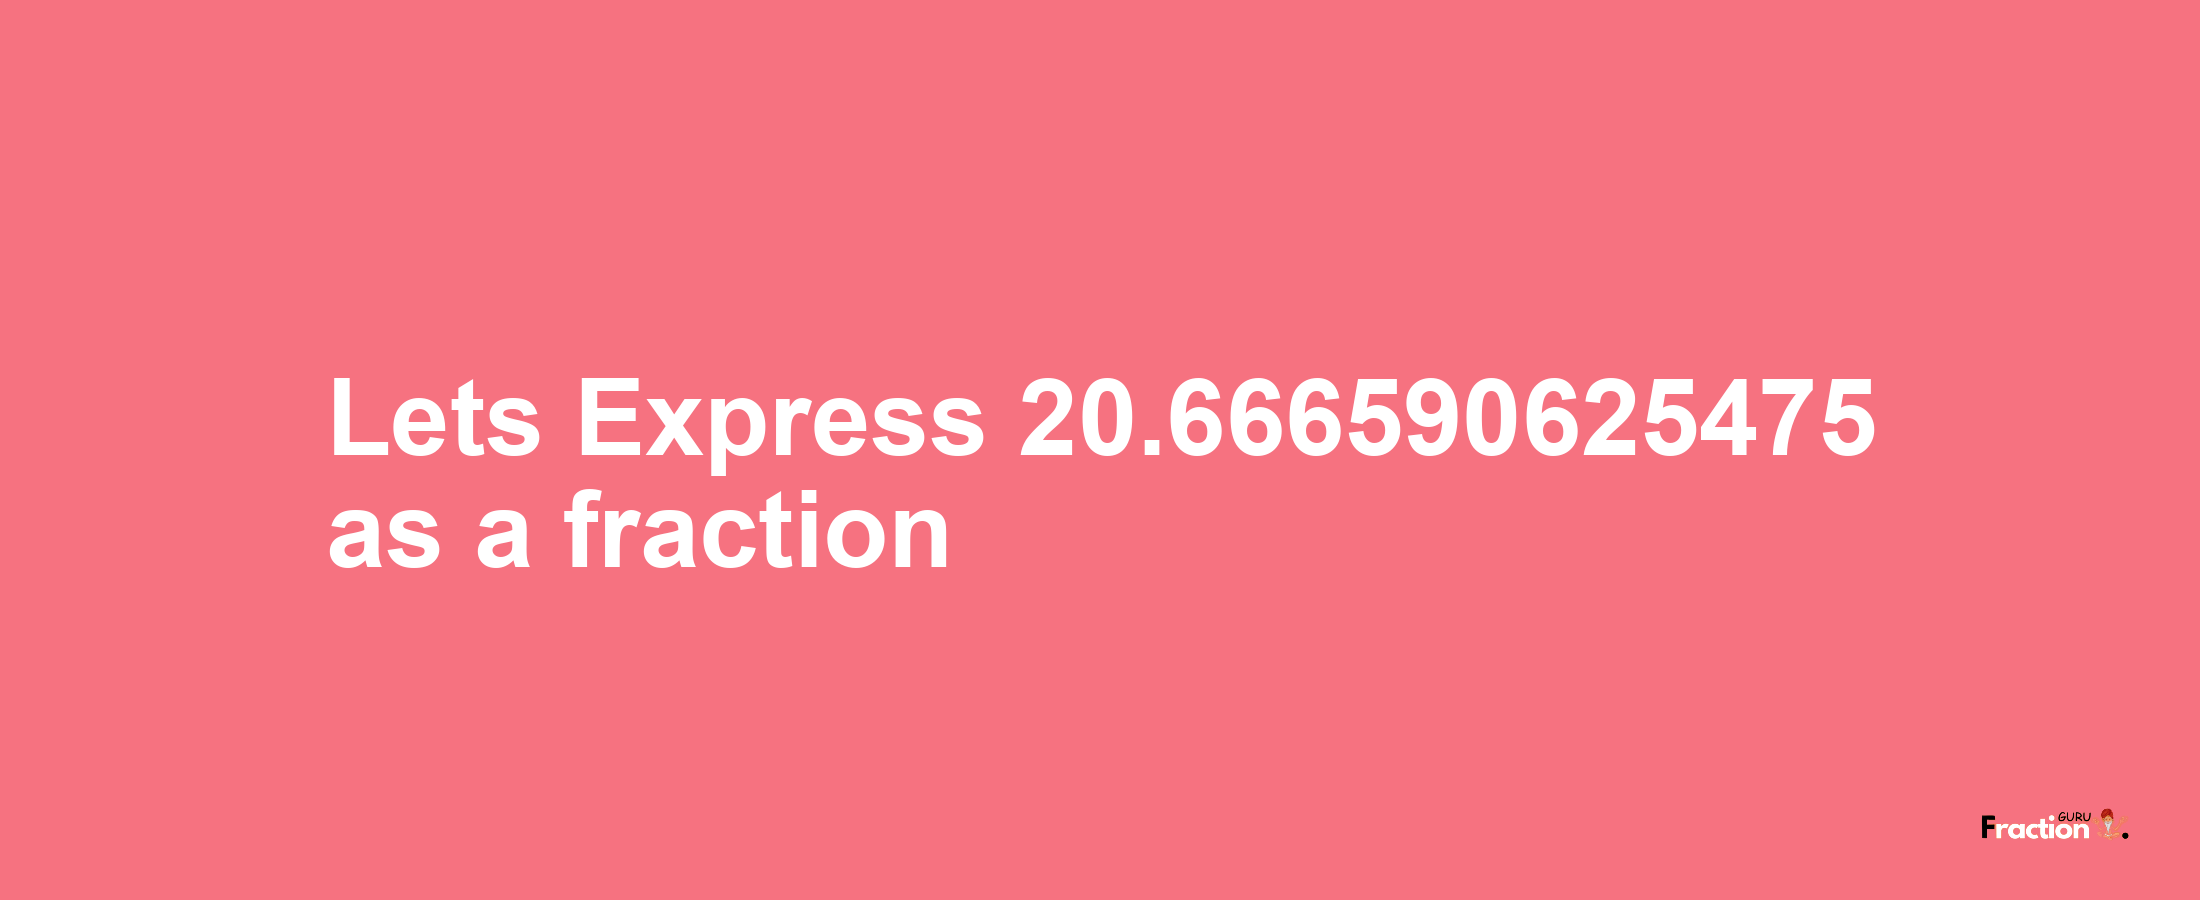 Lets Express 20.666590625475 as afraction